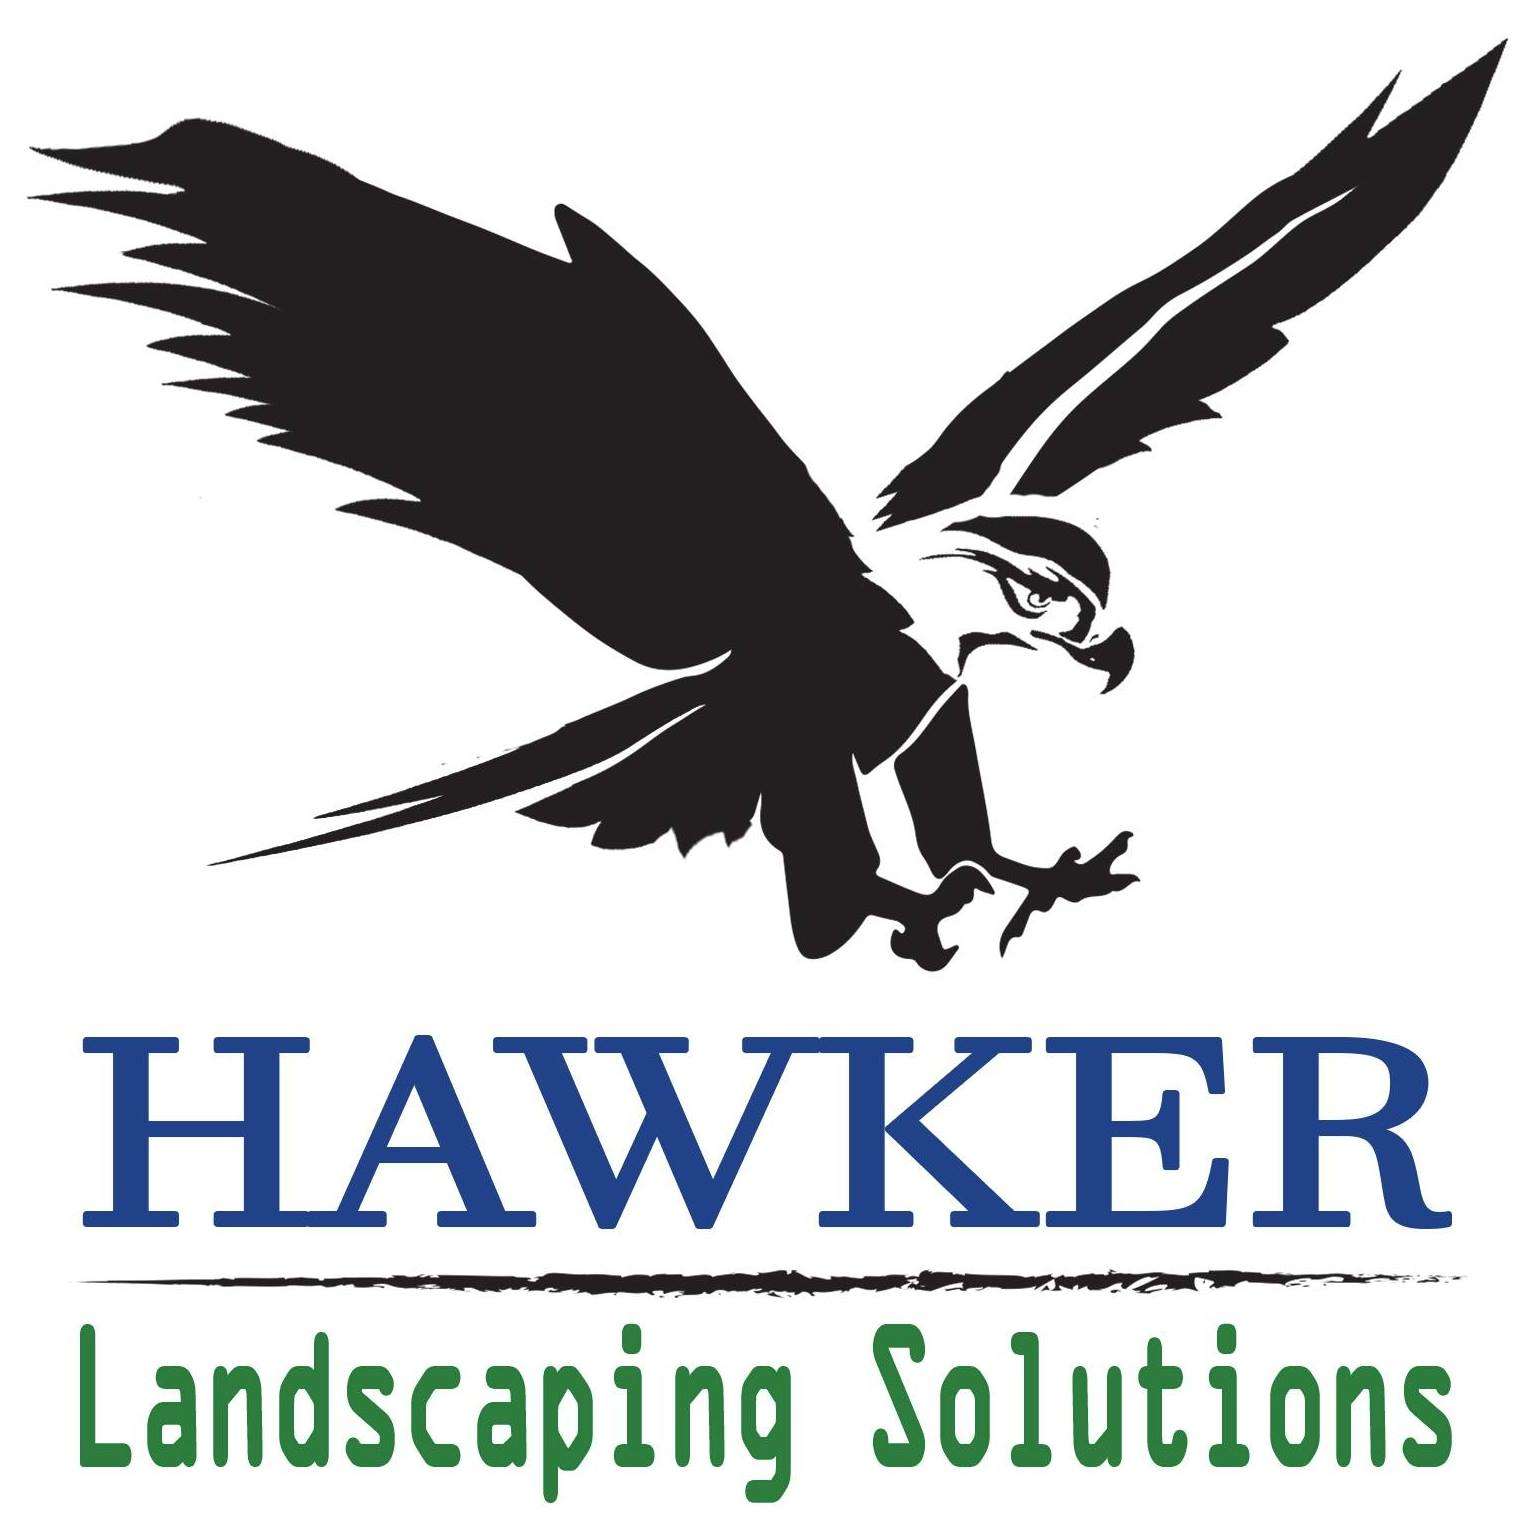 Hawker Landscaping Solutions Logo